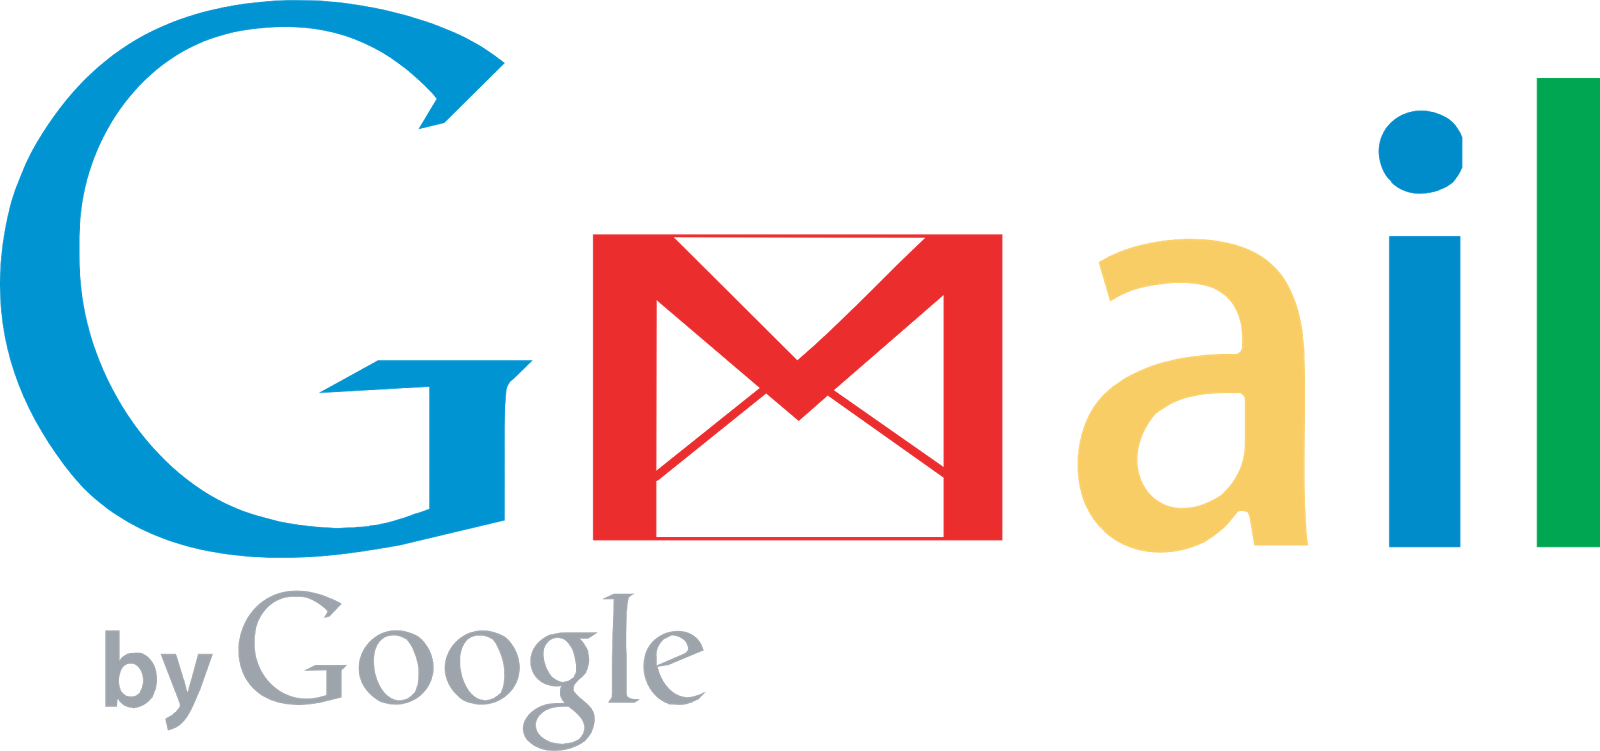 Gmail Identity Strategic Focus By - we should post real brands for april fools day thats roblox